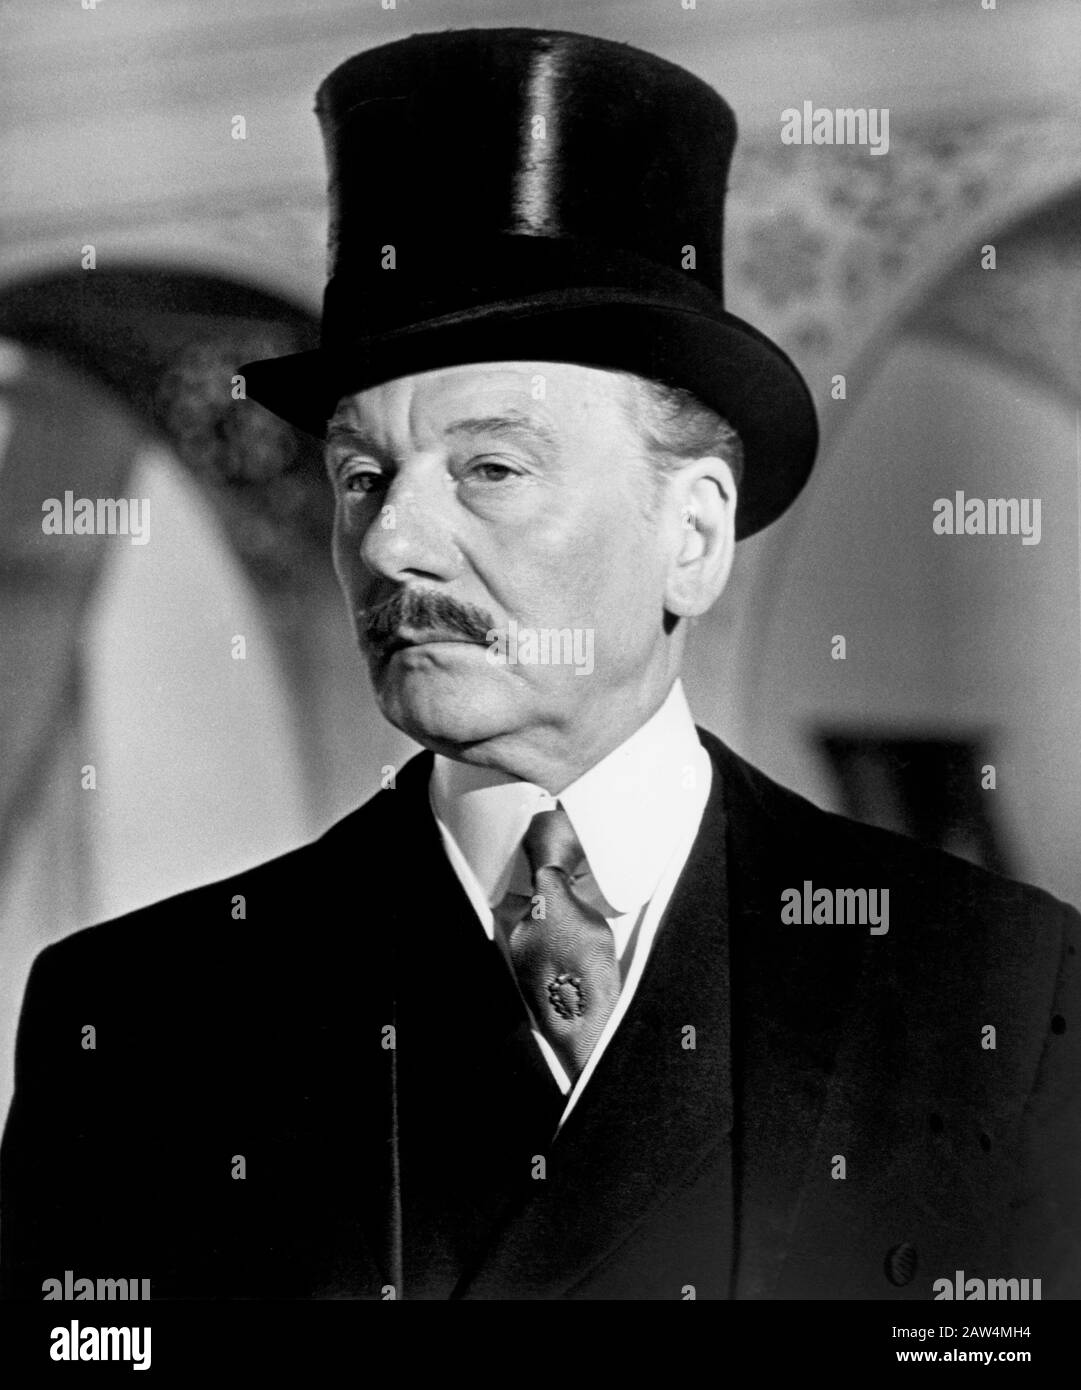 John Gielgud, Publicity Portrait for the Film, "Oh! What a Lovely War", Paramount Pictures, 1969 Stock Photo